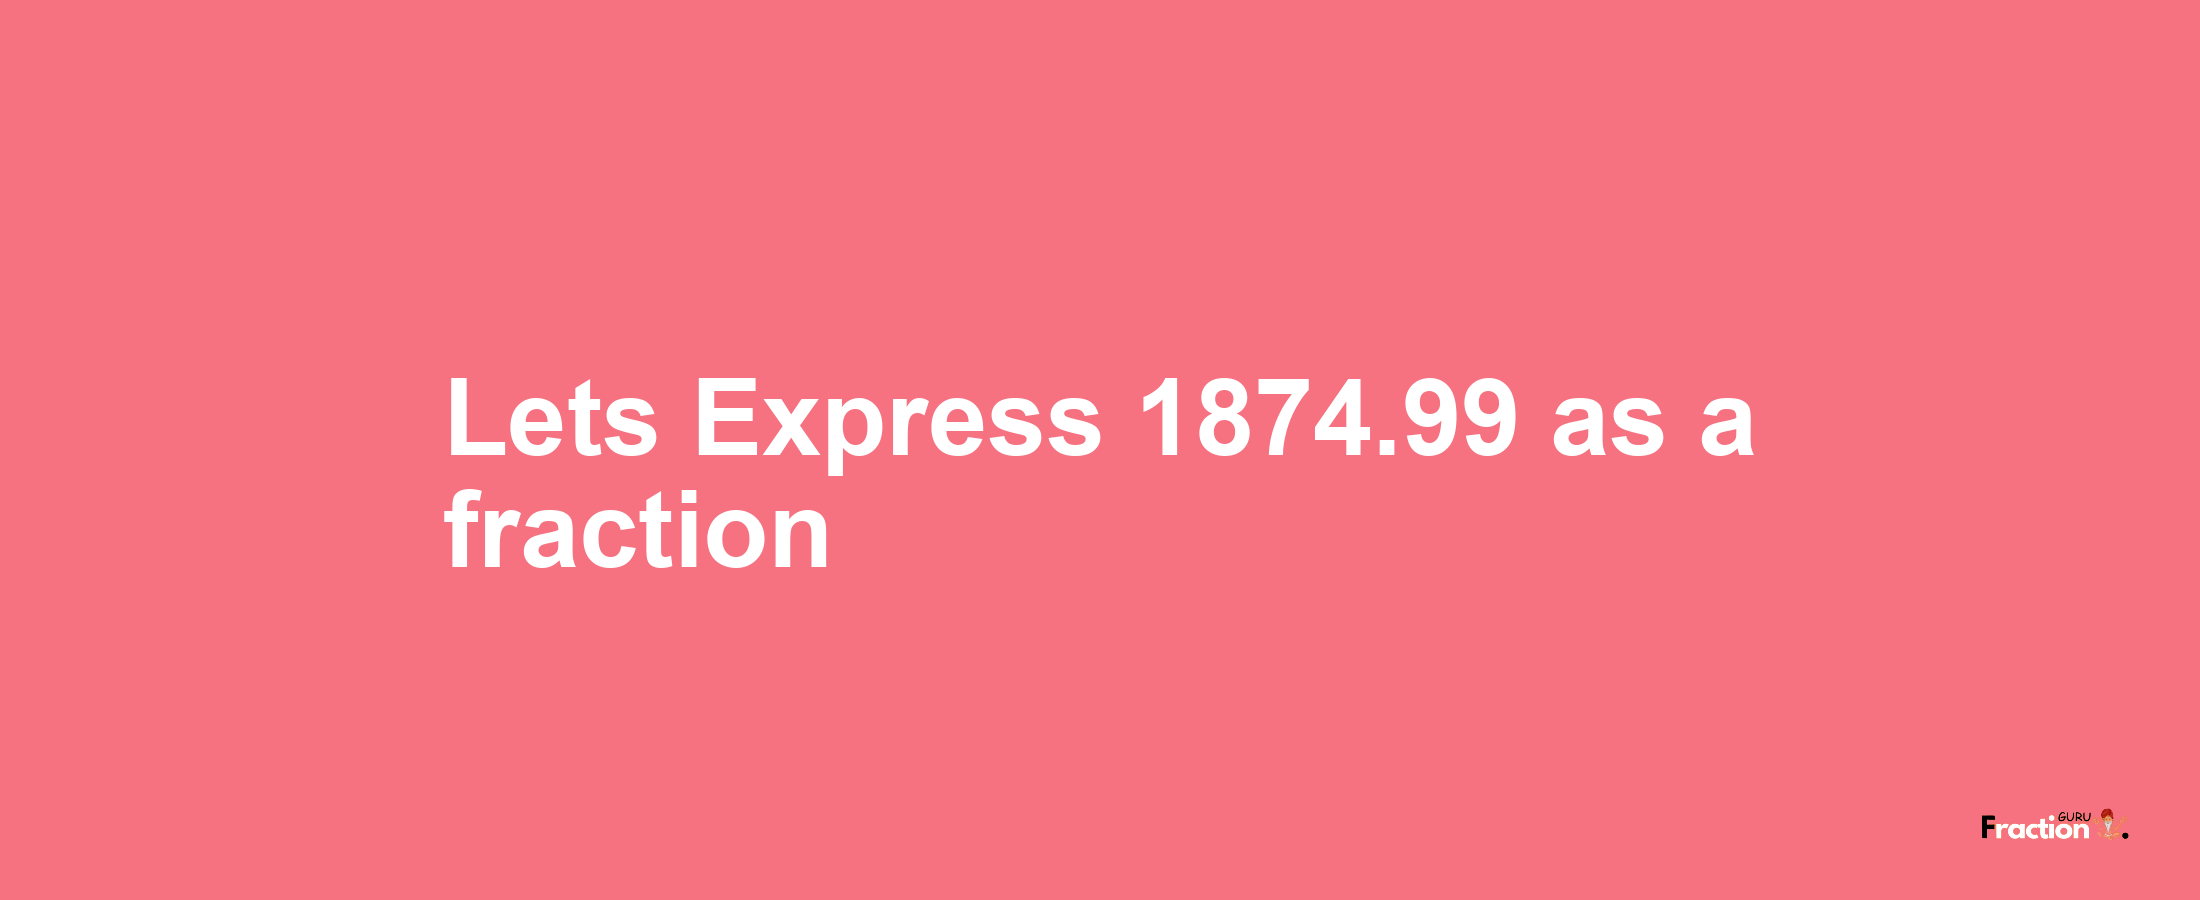 Lets Express 1874.99 as afraction